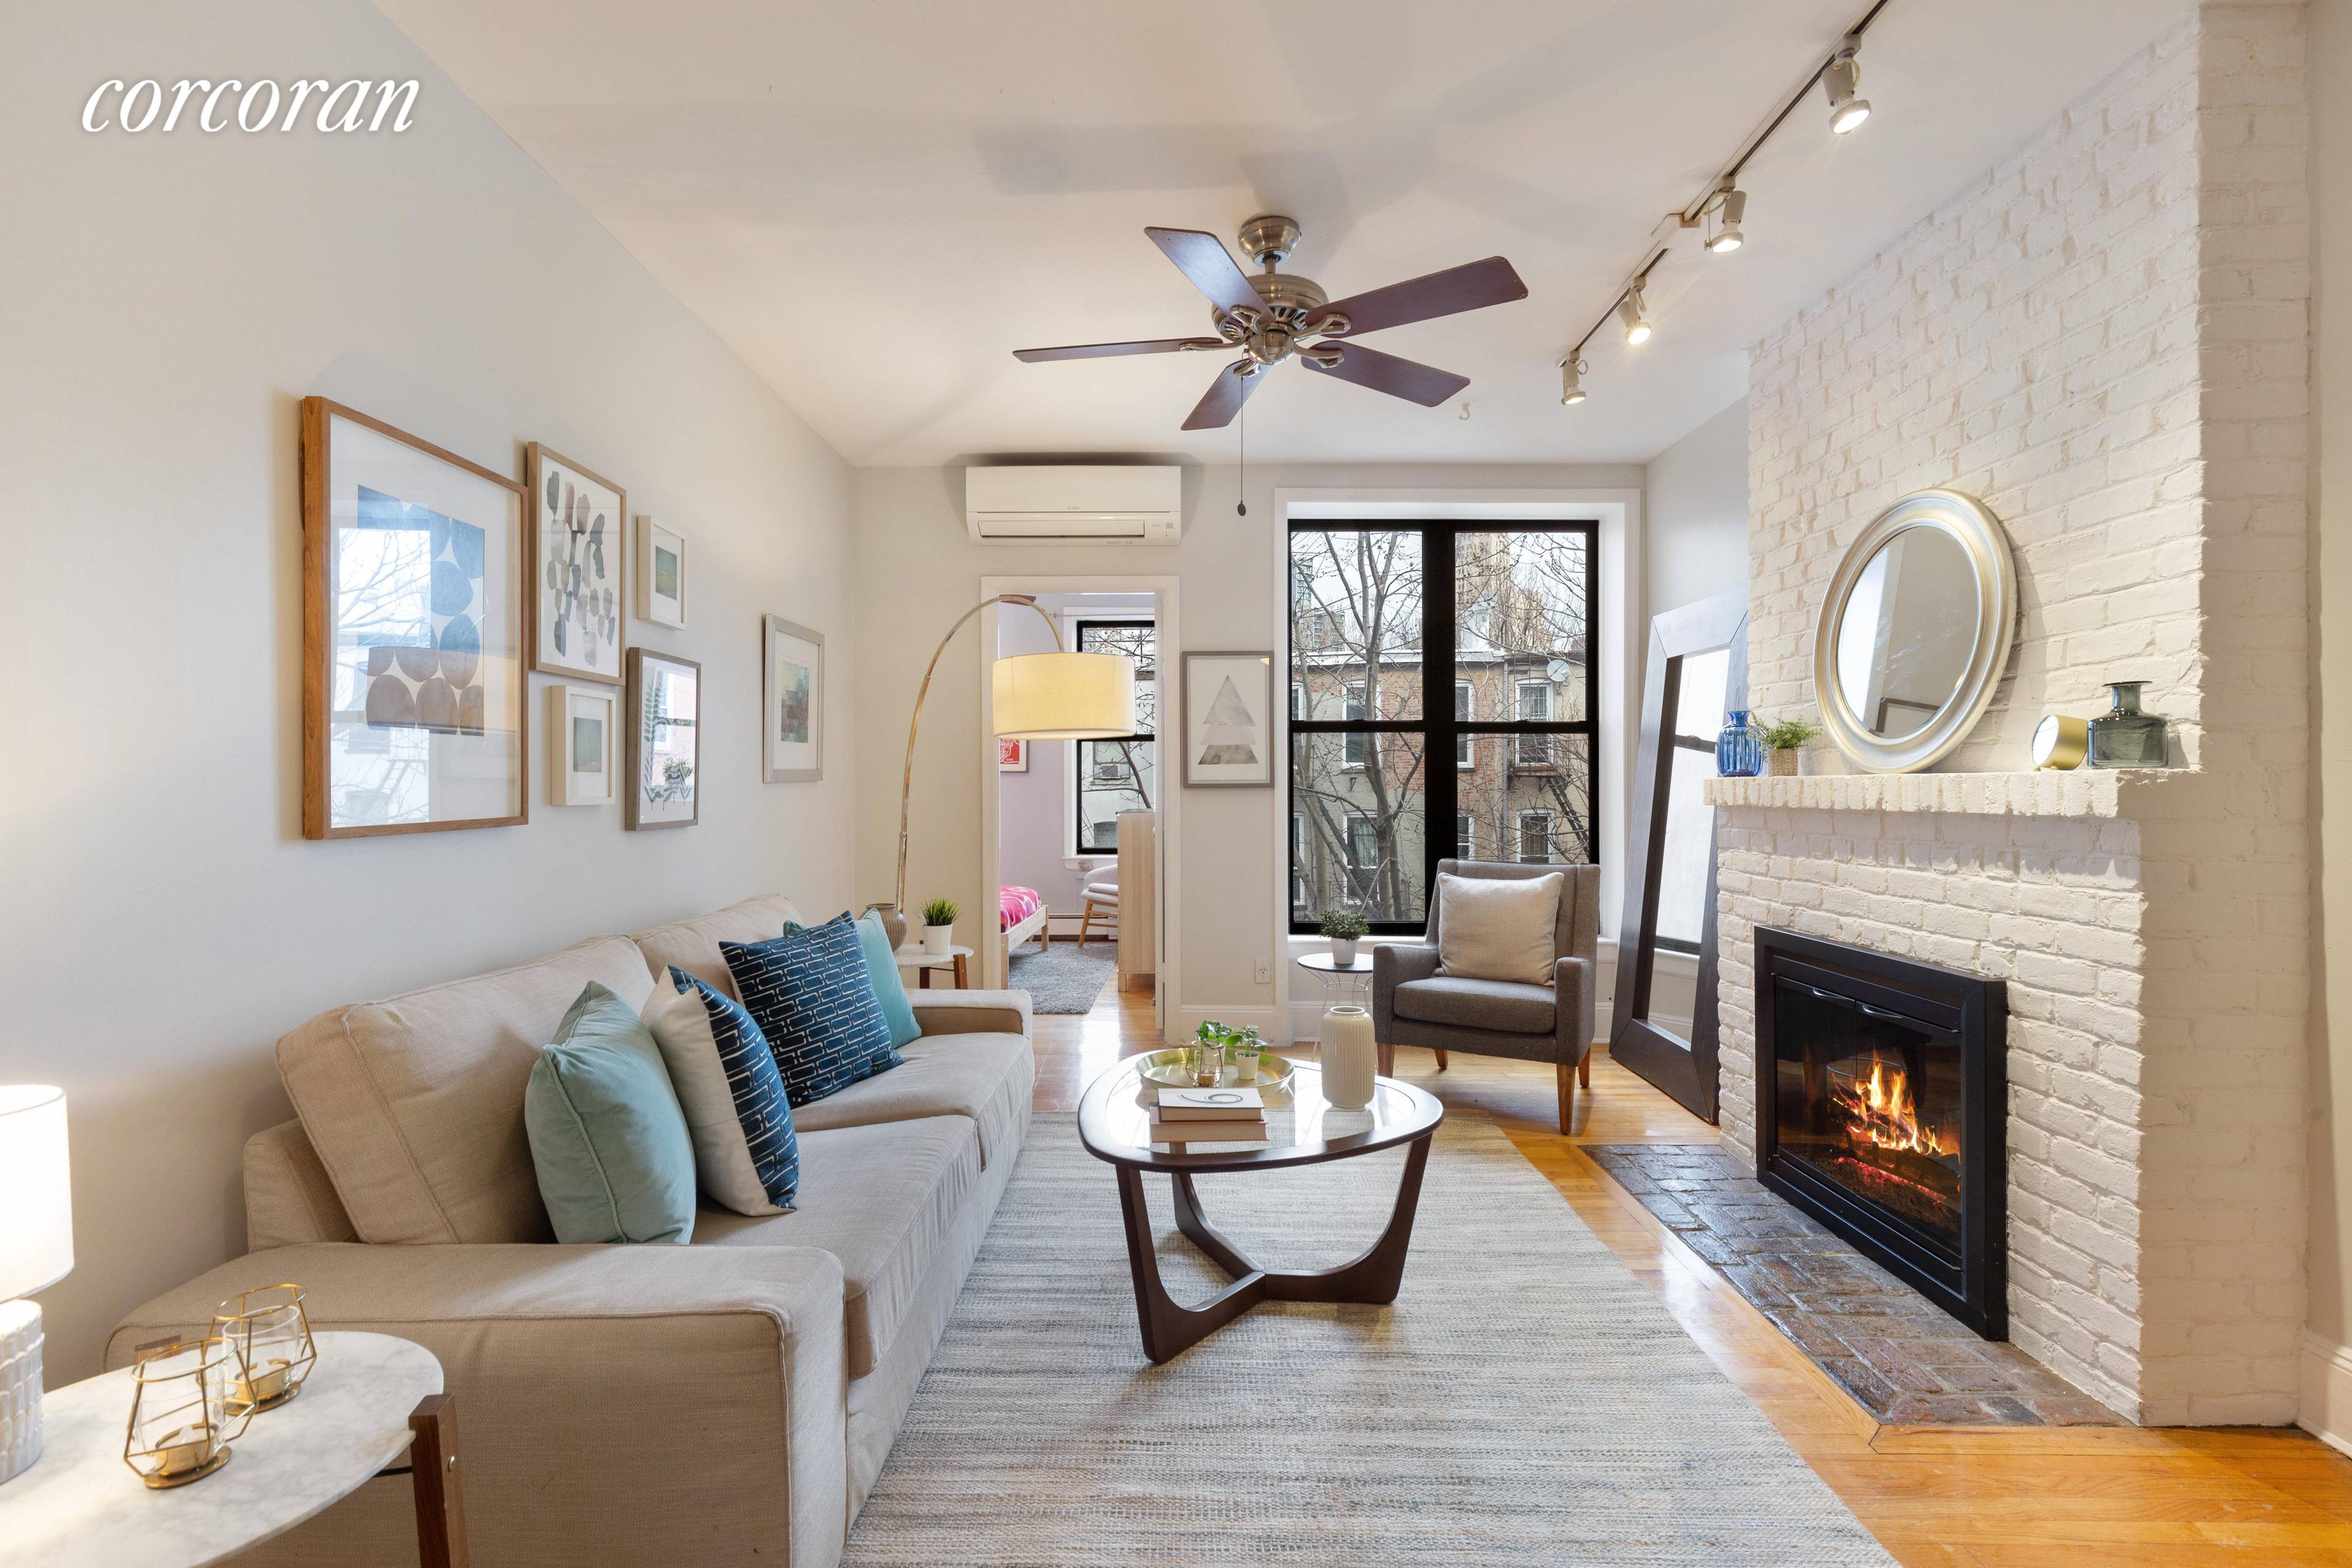 At the crossroads of Boerum Hill and Park Slope this lovely two bedroom, one bath apartment has a wonderful feel and a great layout that maximizes every inchA no space ...